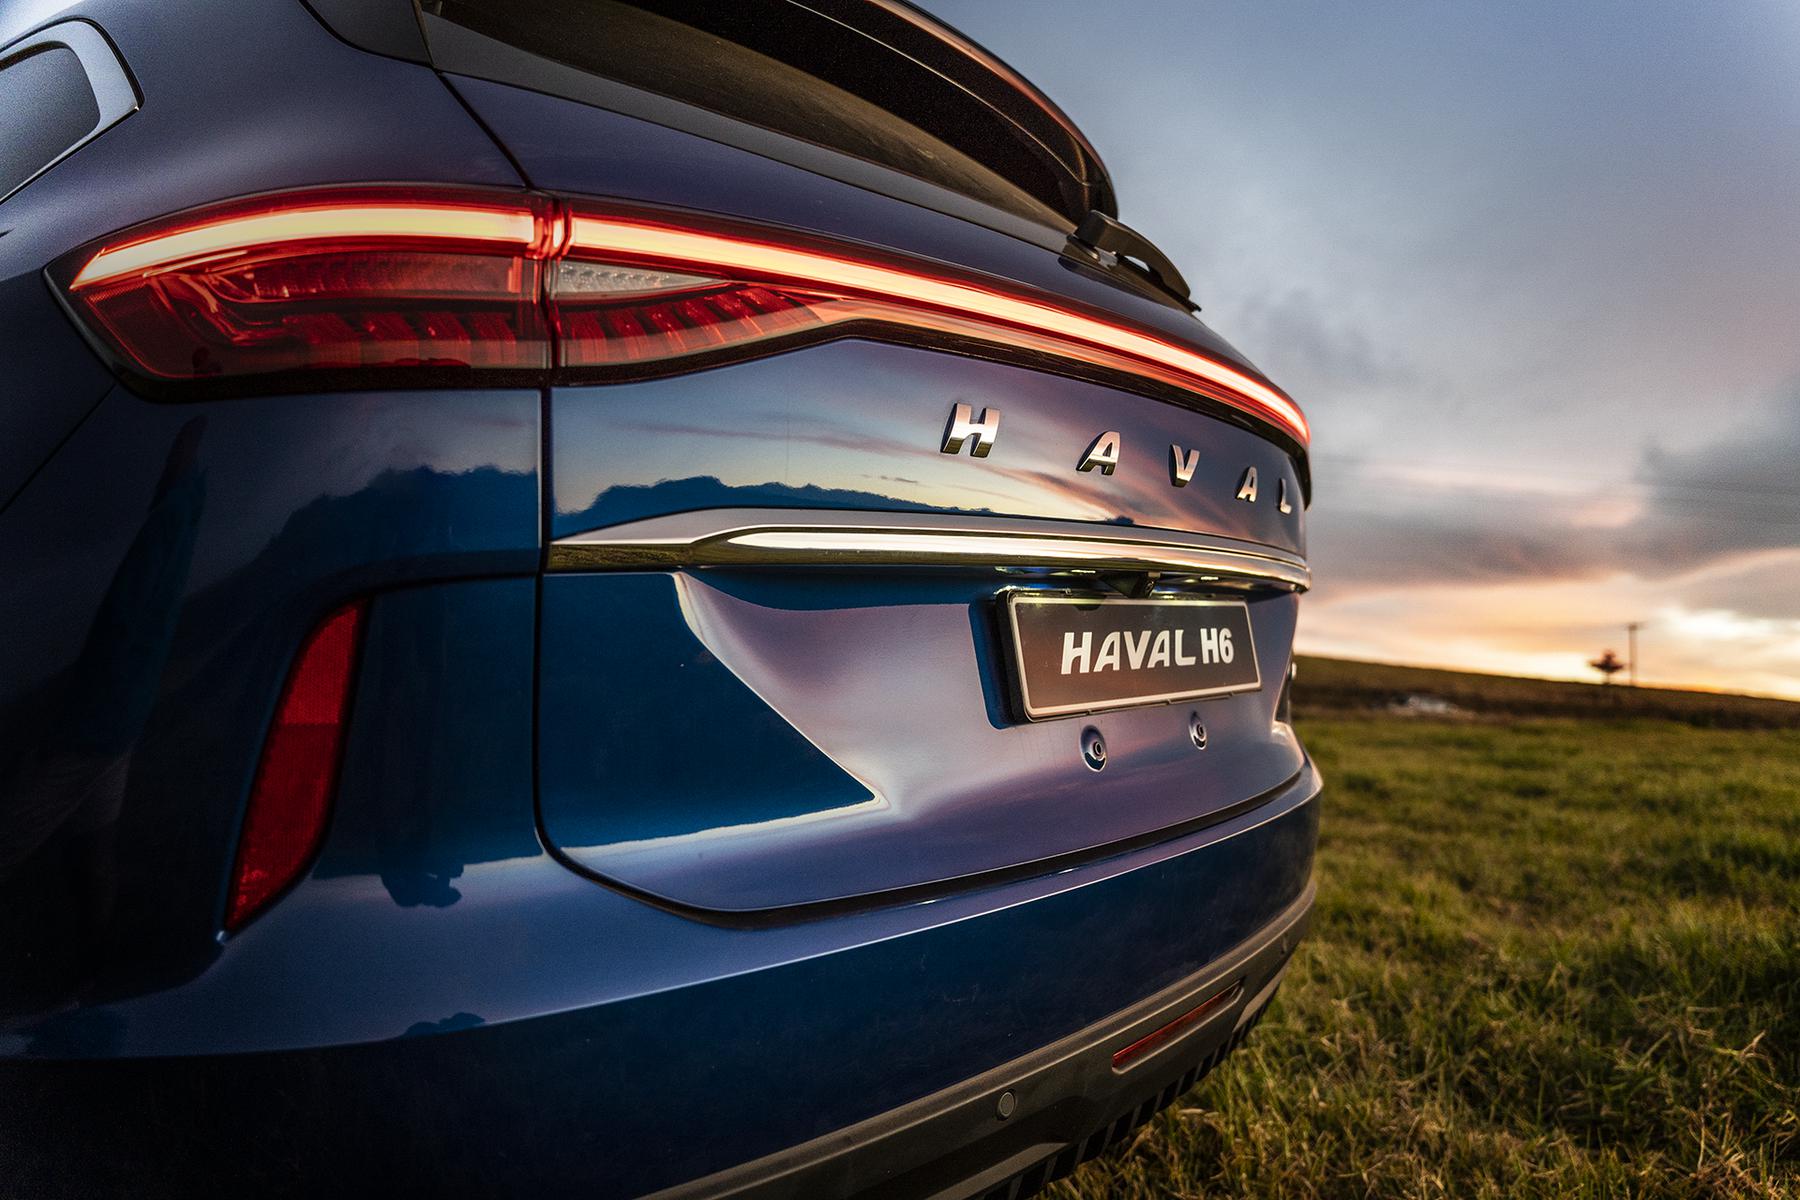 The new Haval H6